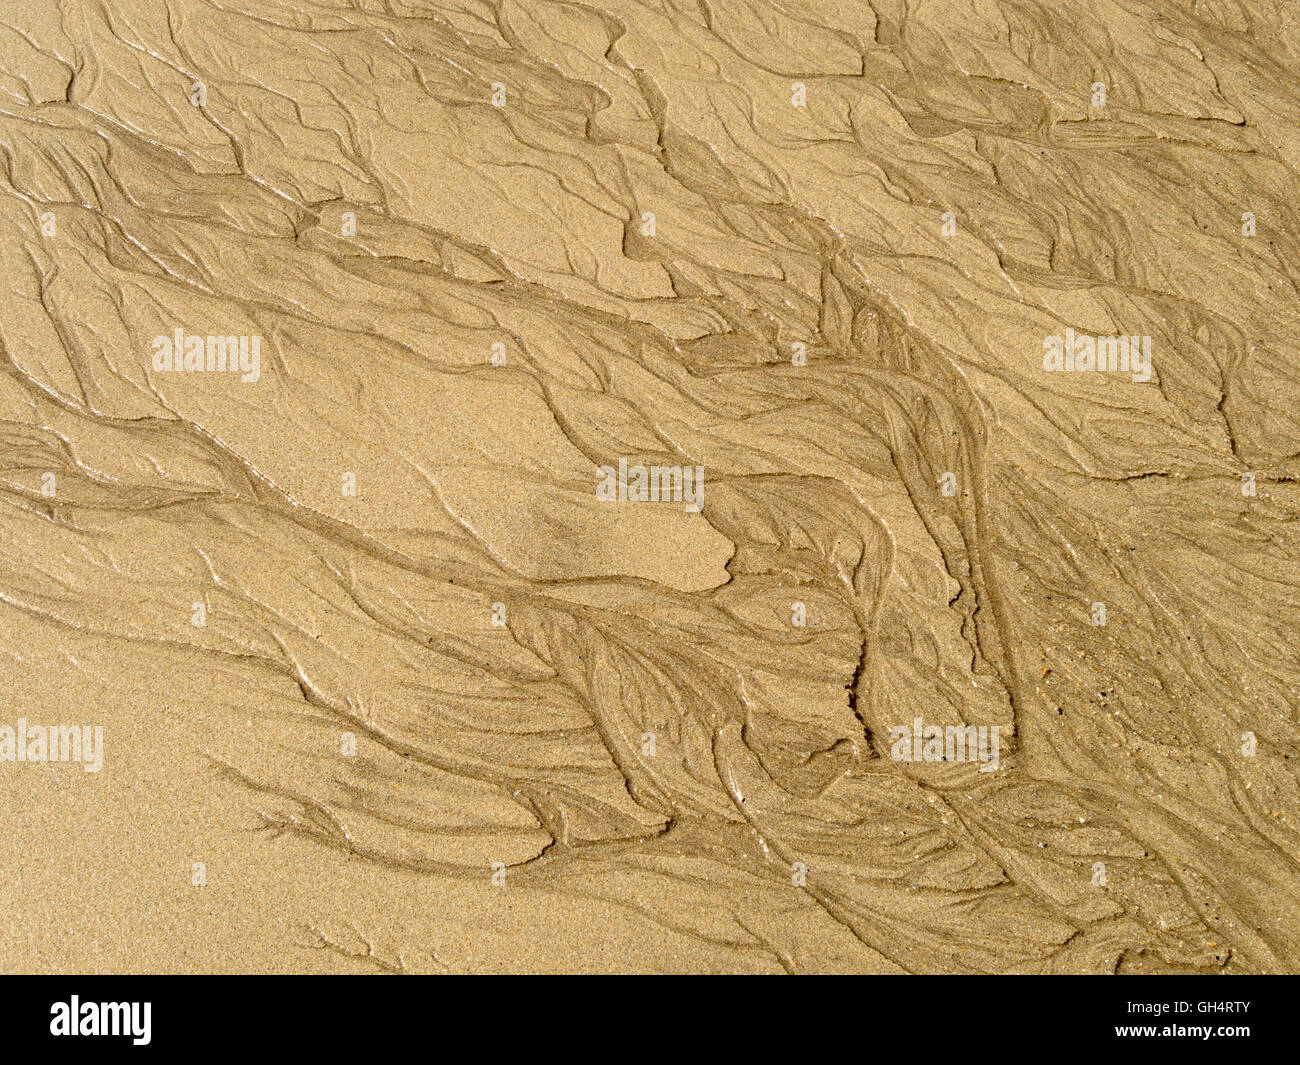 Patterns in yellow beach sand caused by flowing water Stock Photo